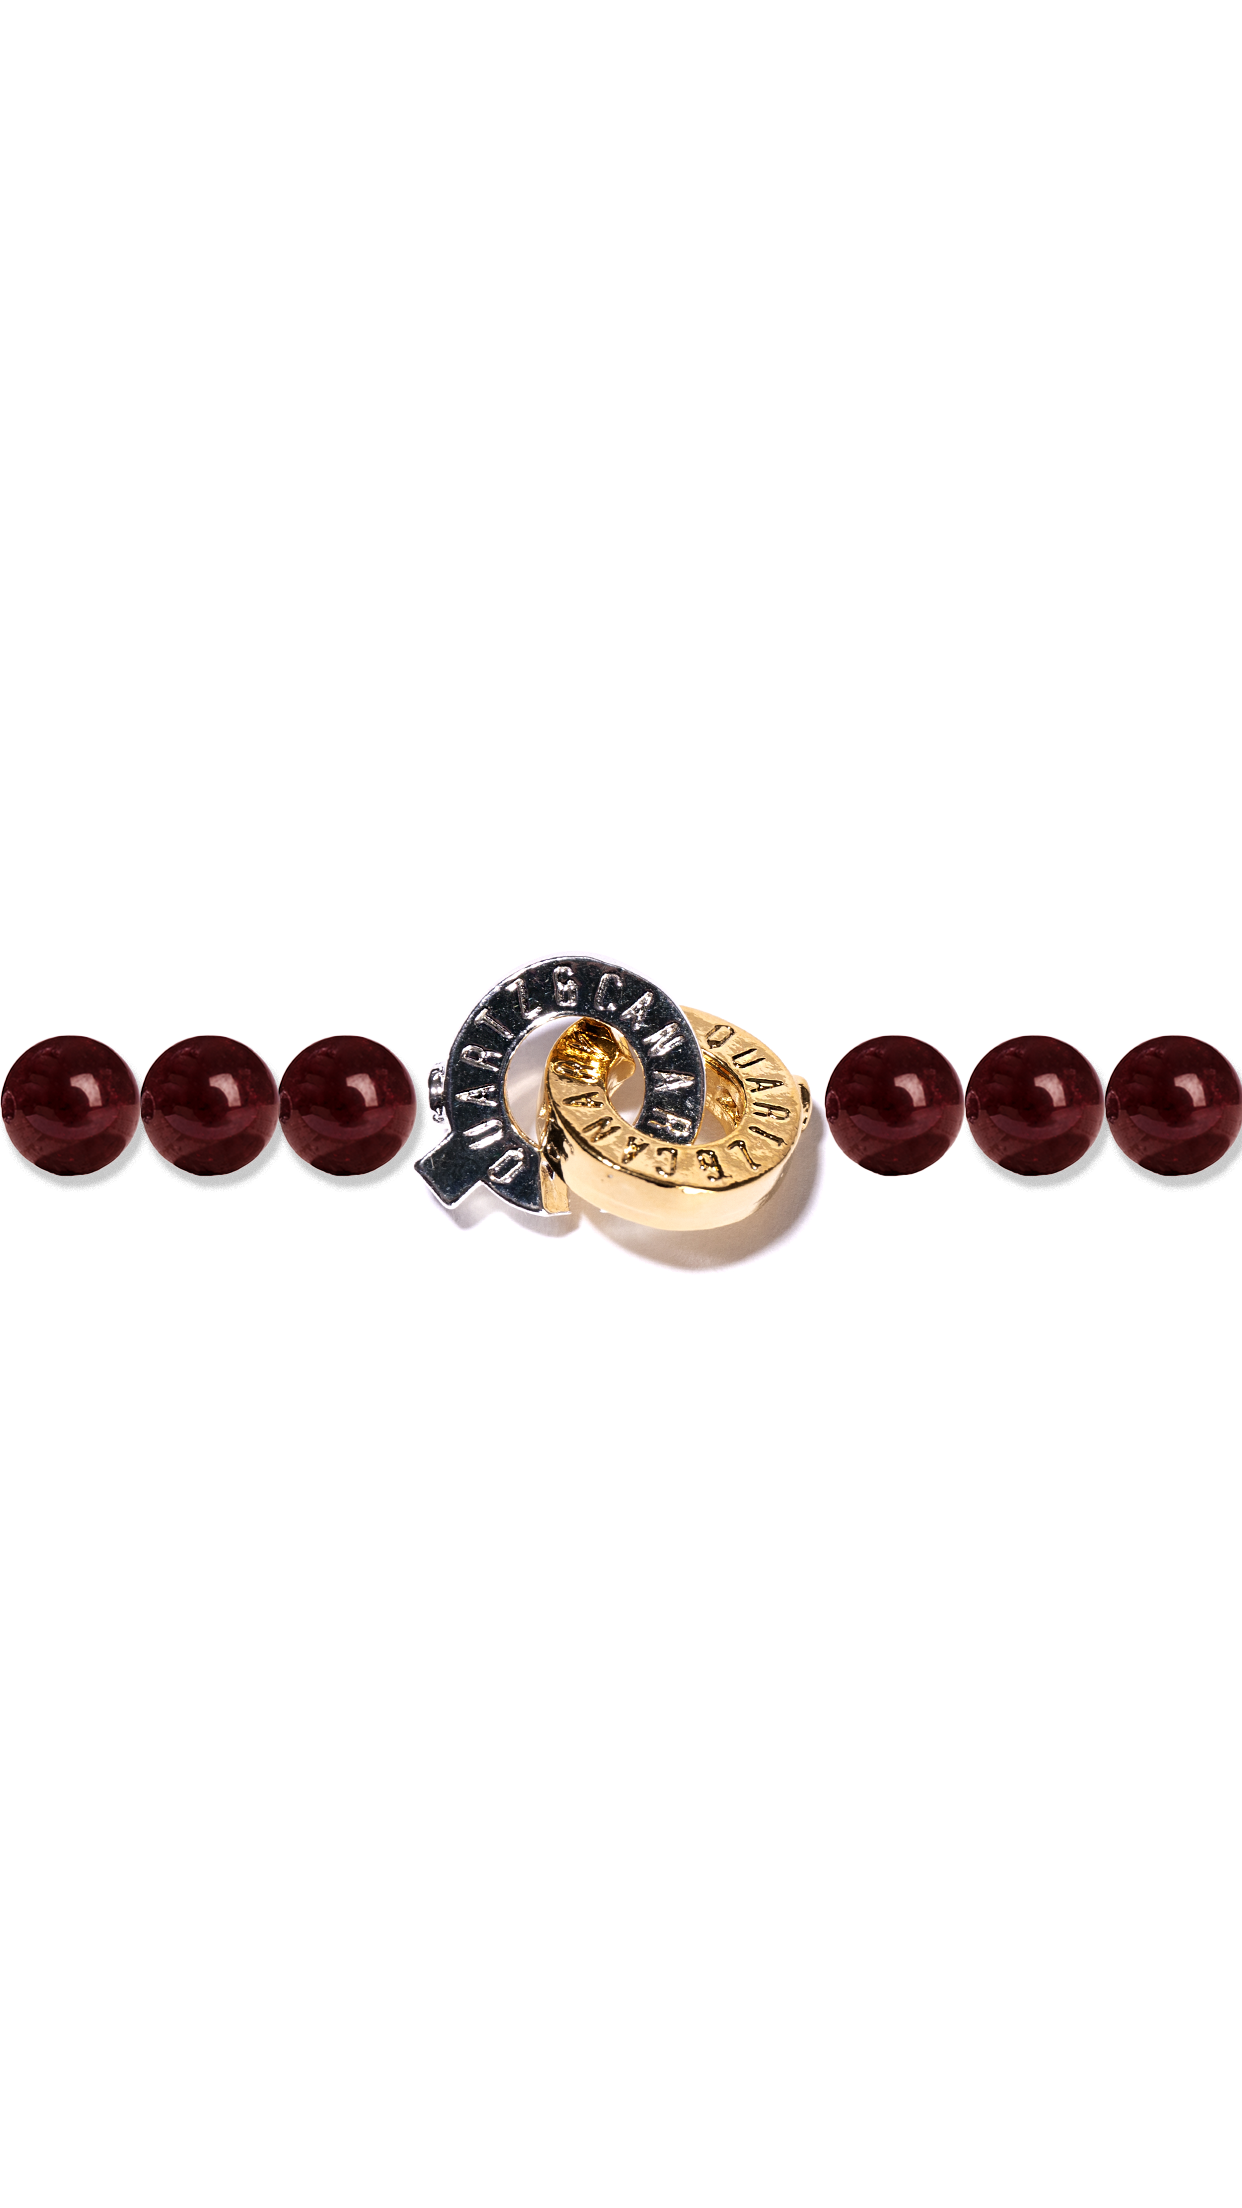 Connected Bracelet - Two Tone Clasp (8mm)